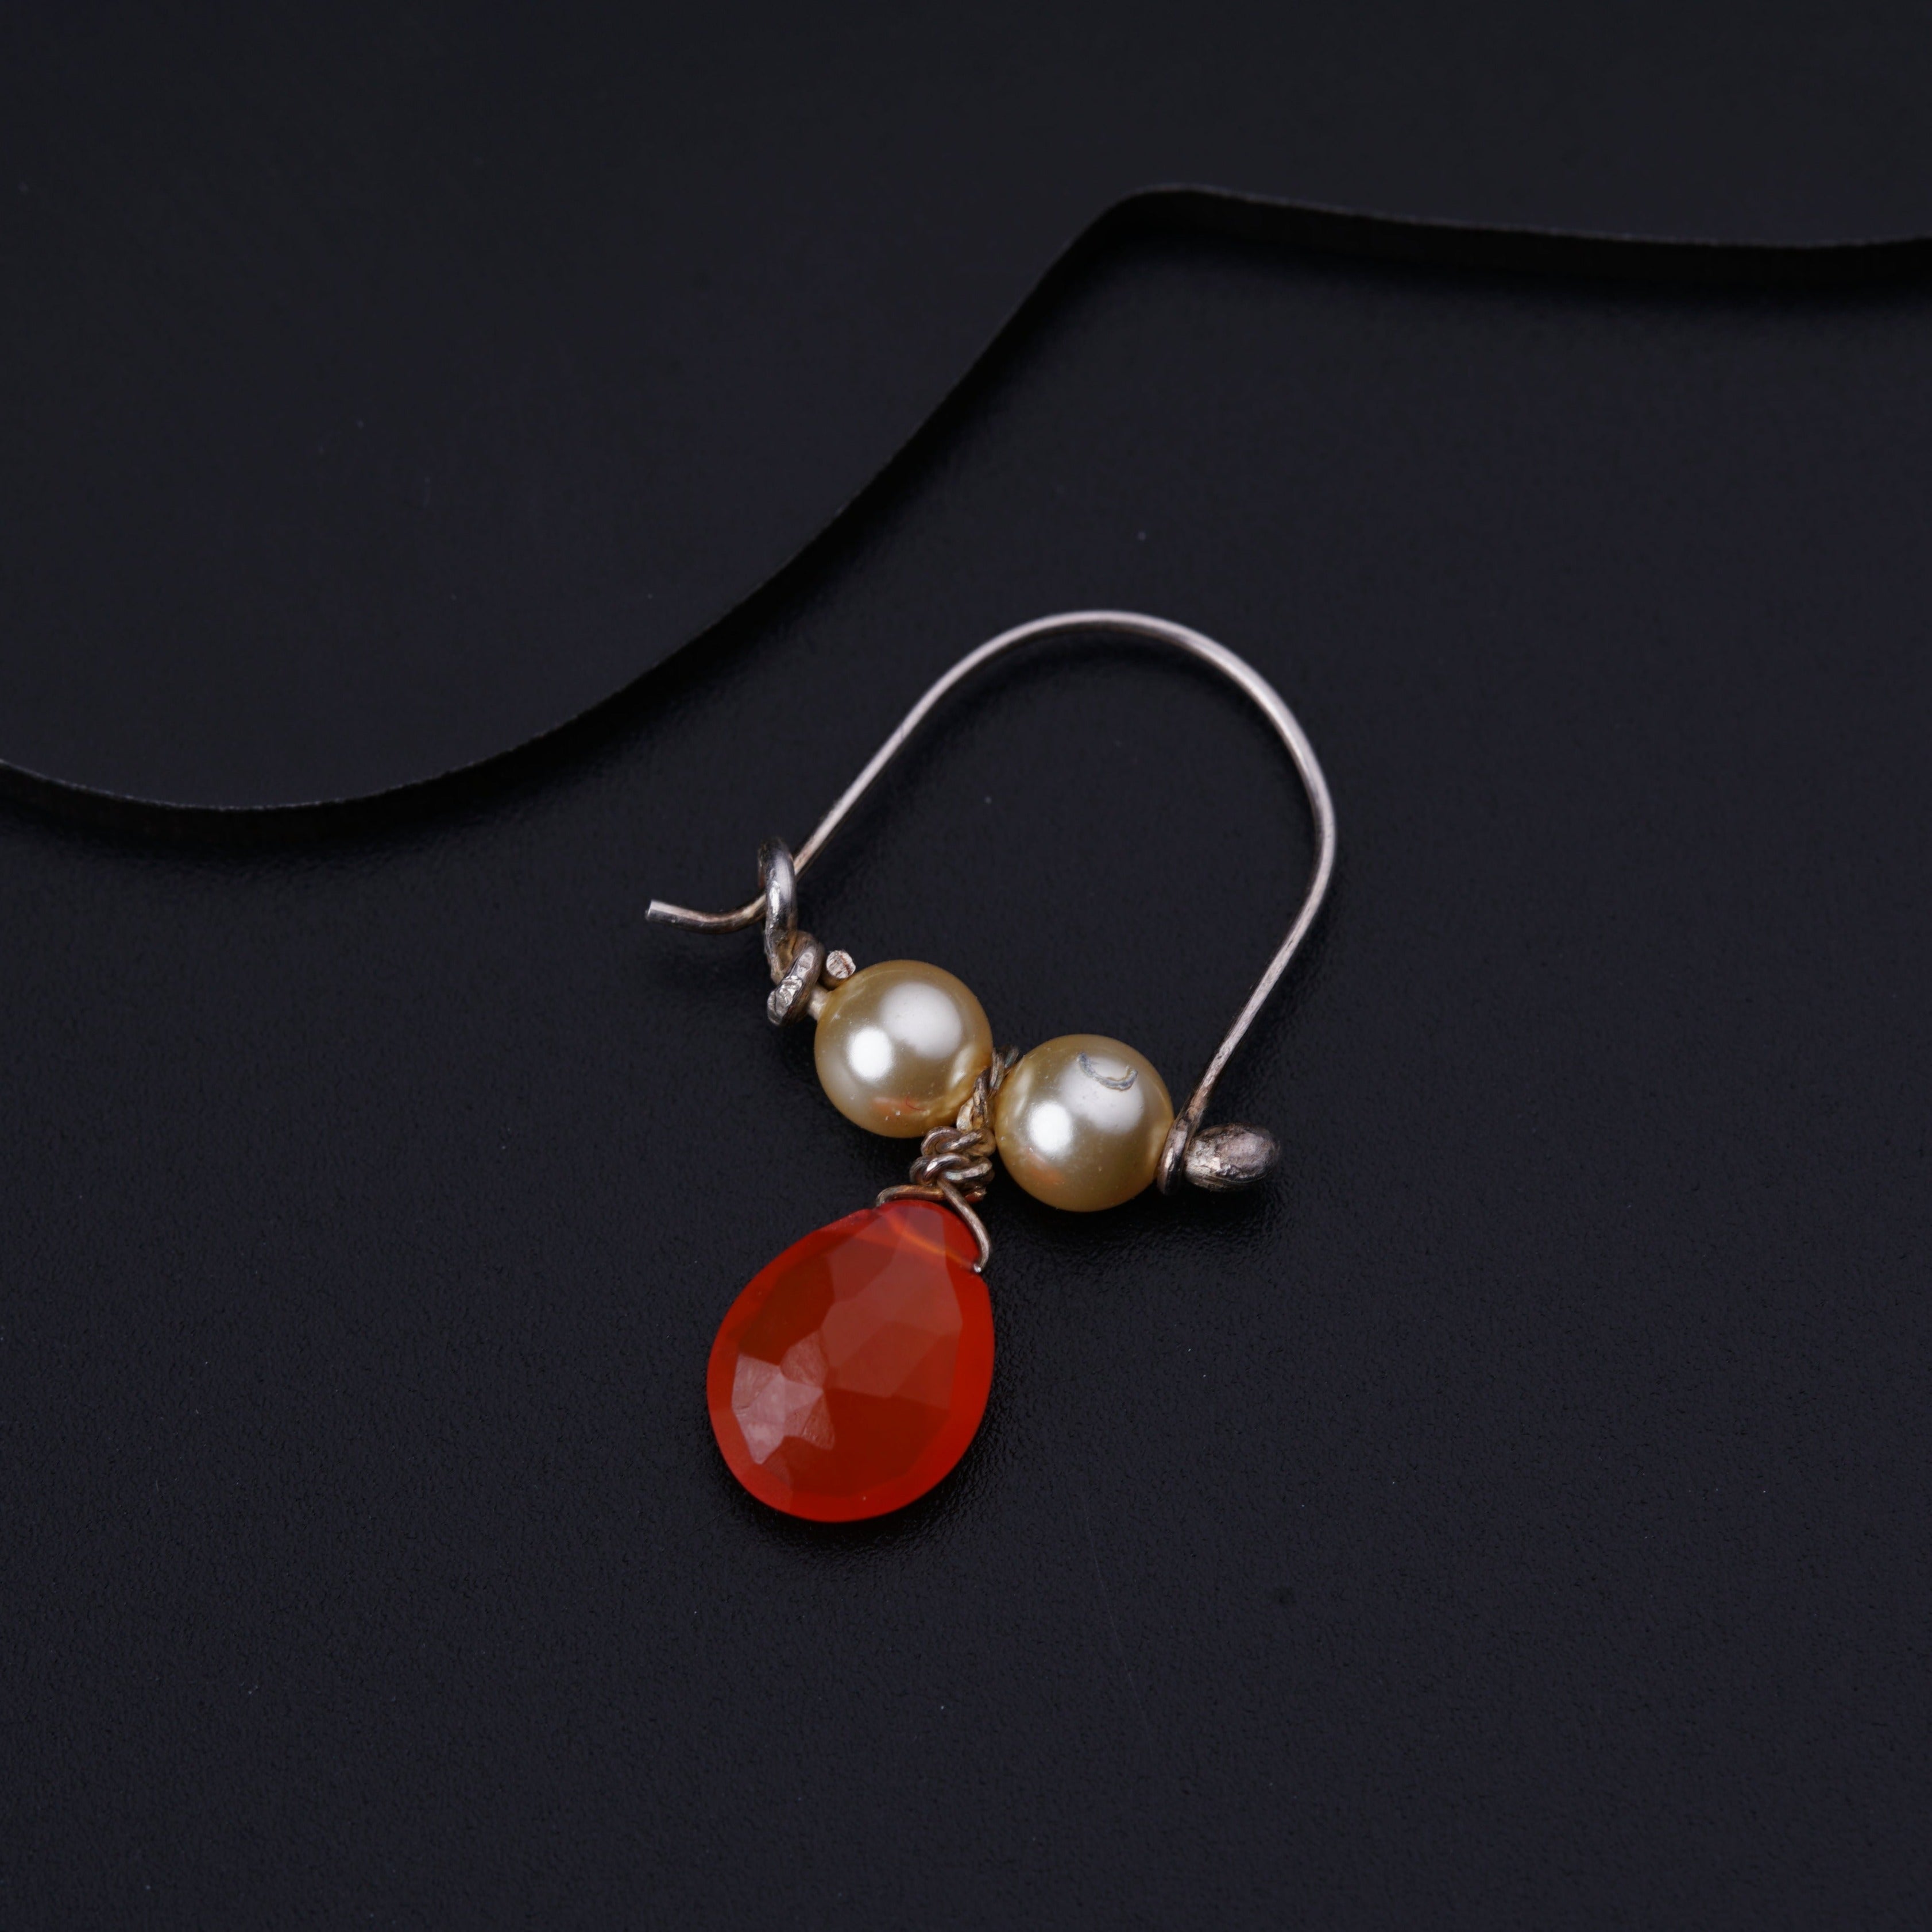 a pair of red and white earrings with pearls